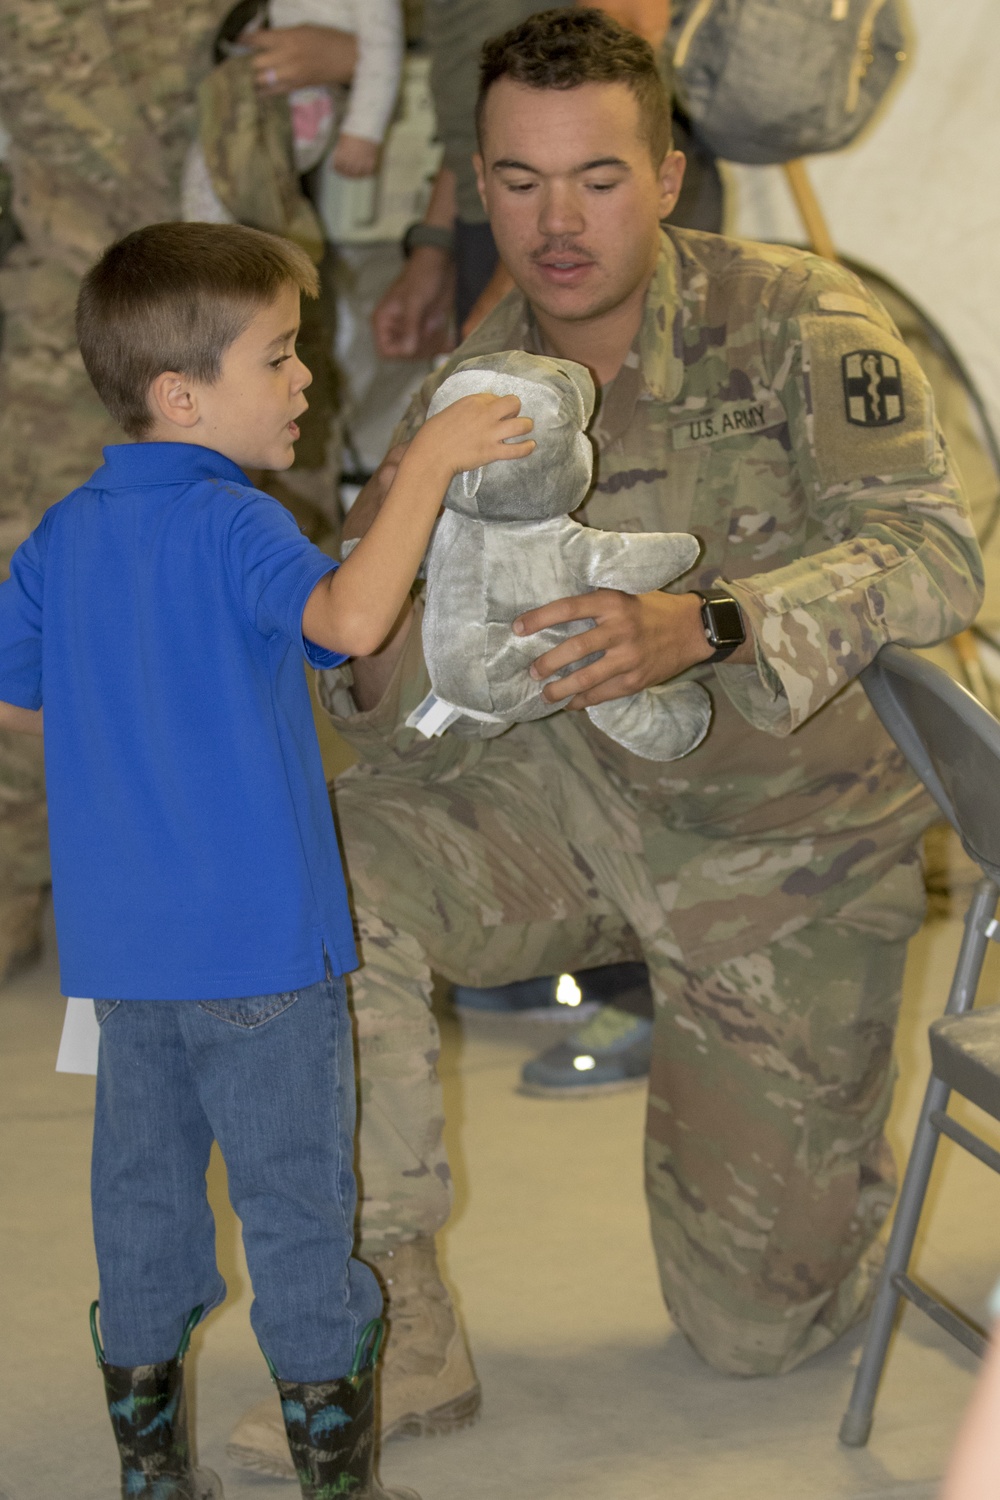 Soldiers celebrate Family Day with loved ones in the field